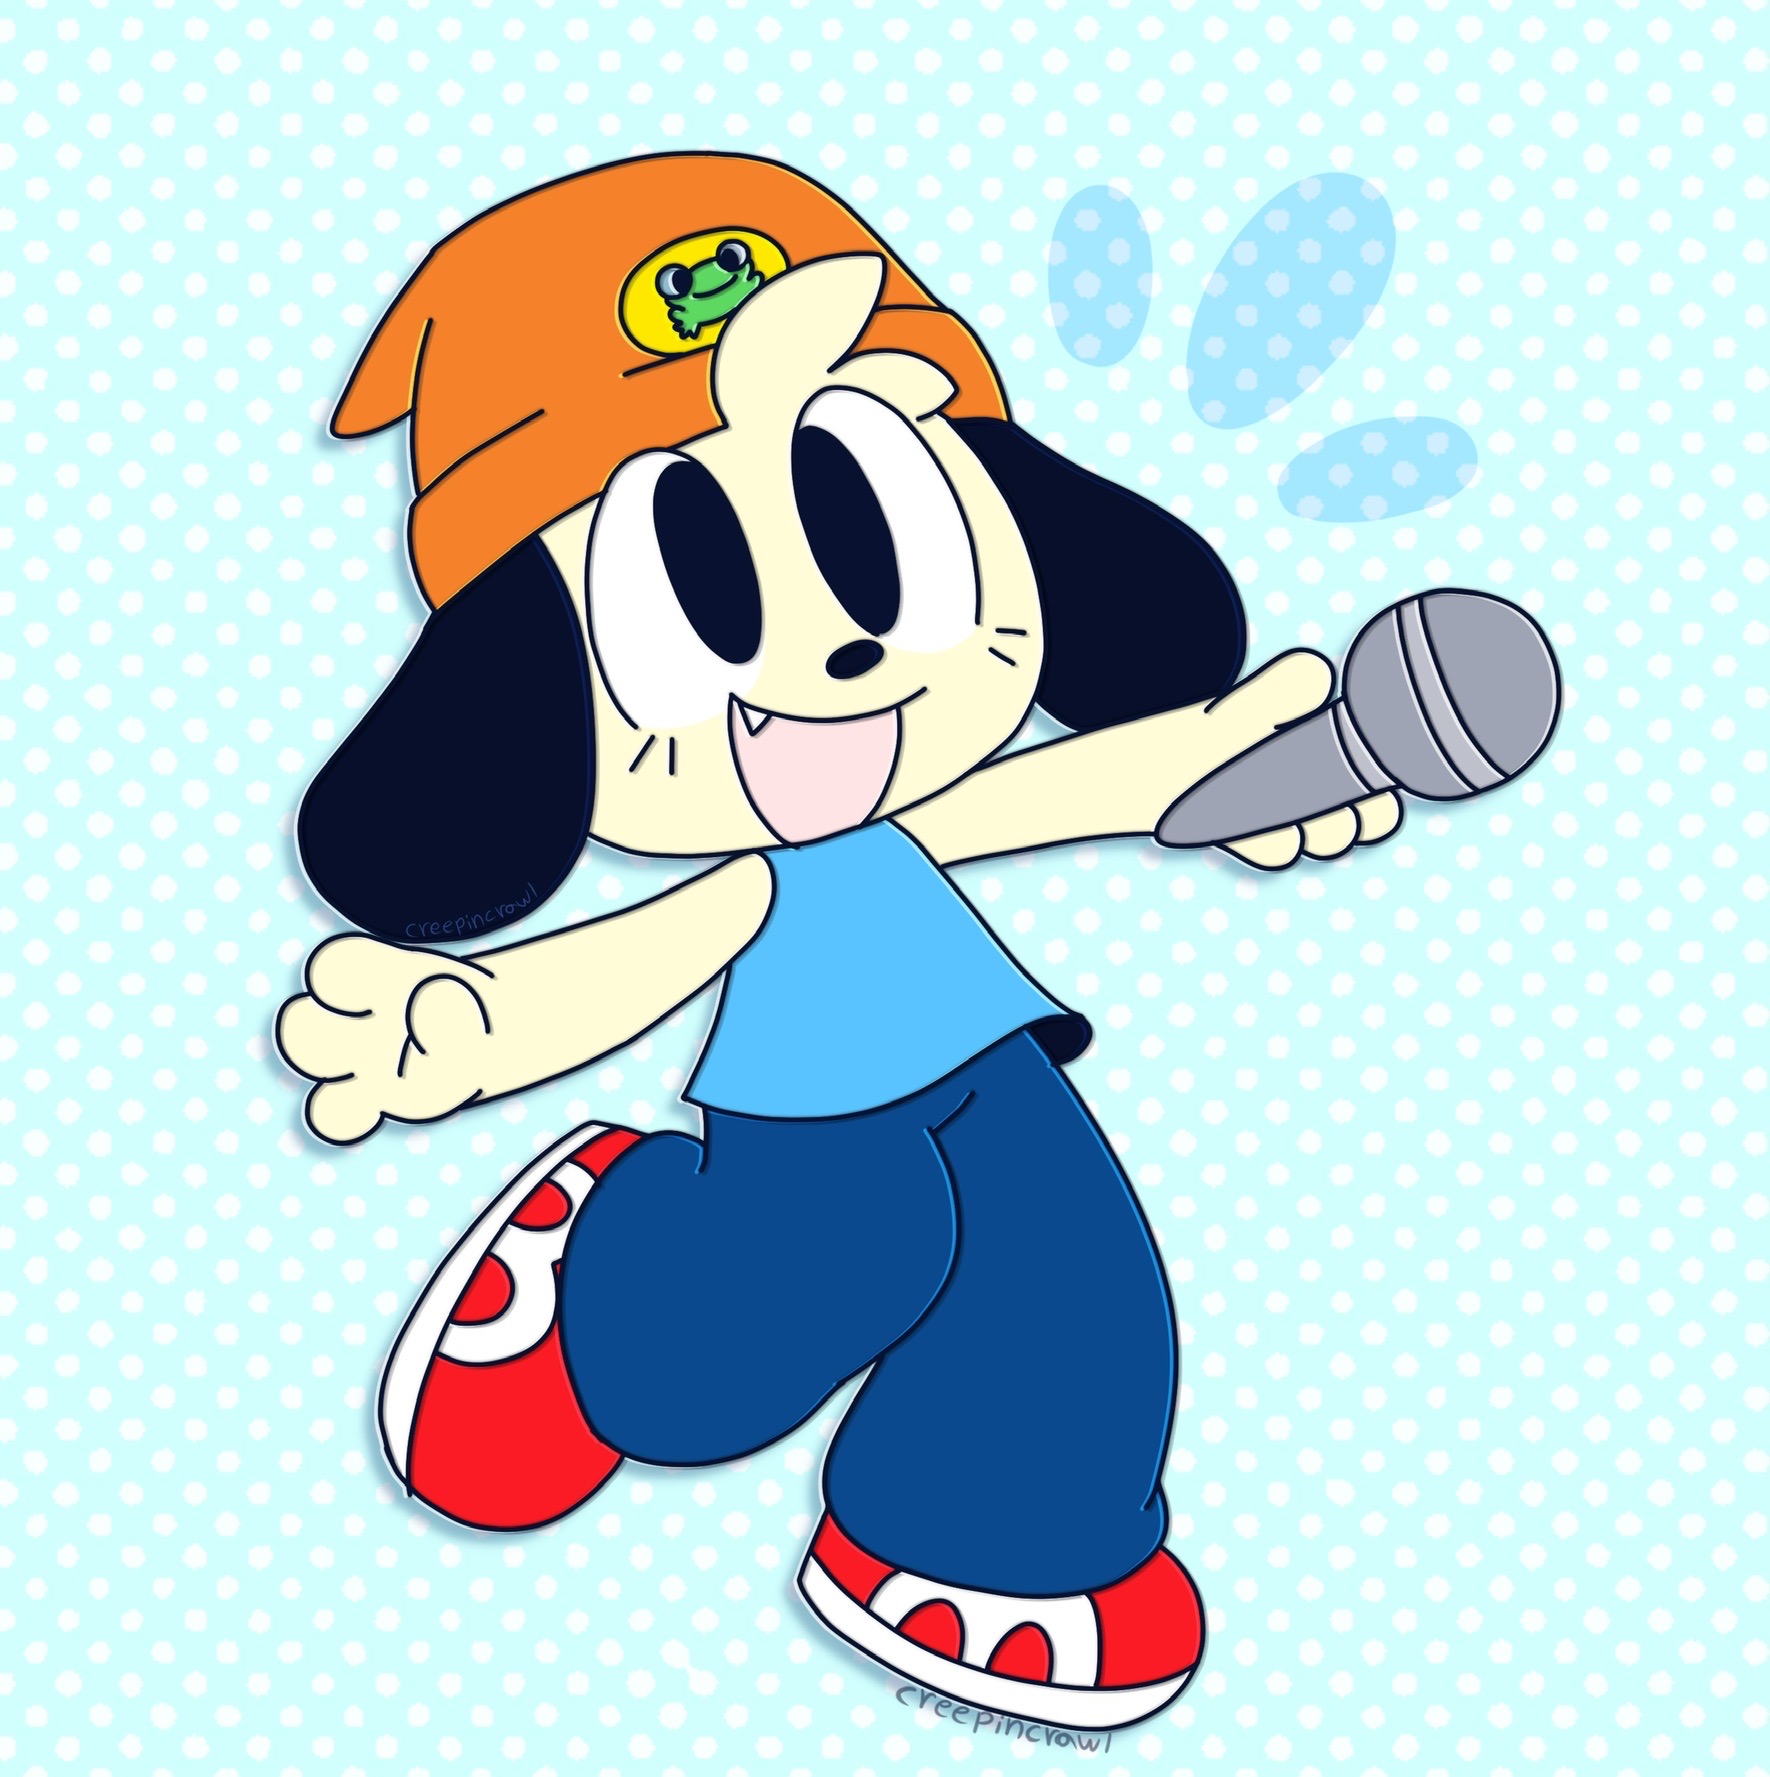 Parappa the rapper (and other characters) by Arcticatt on DeviantArt